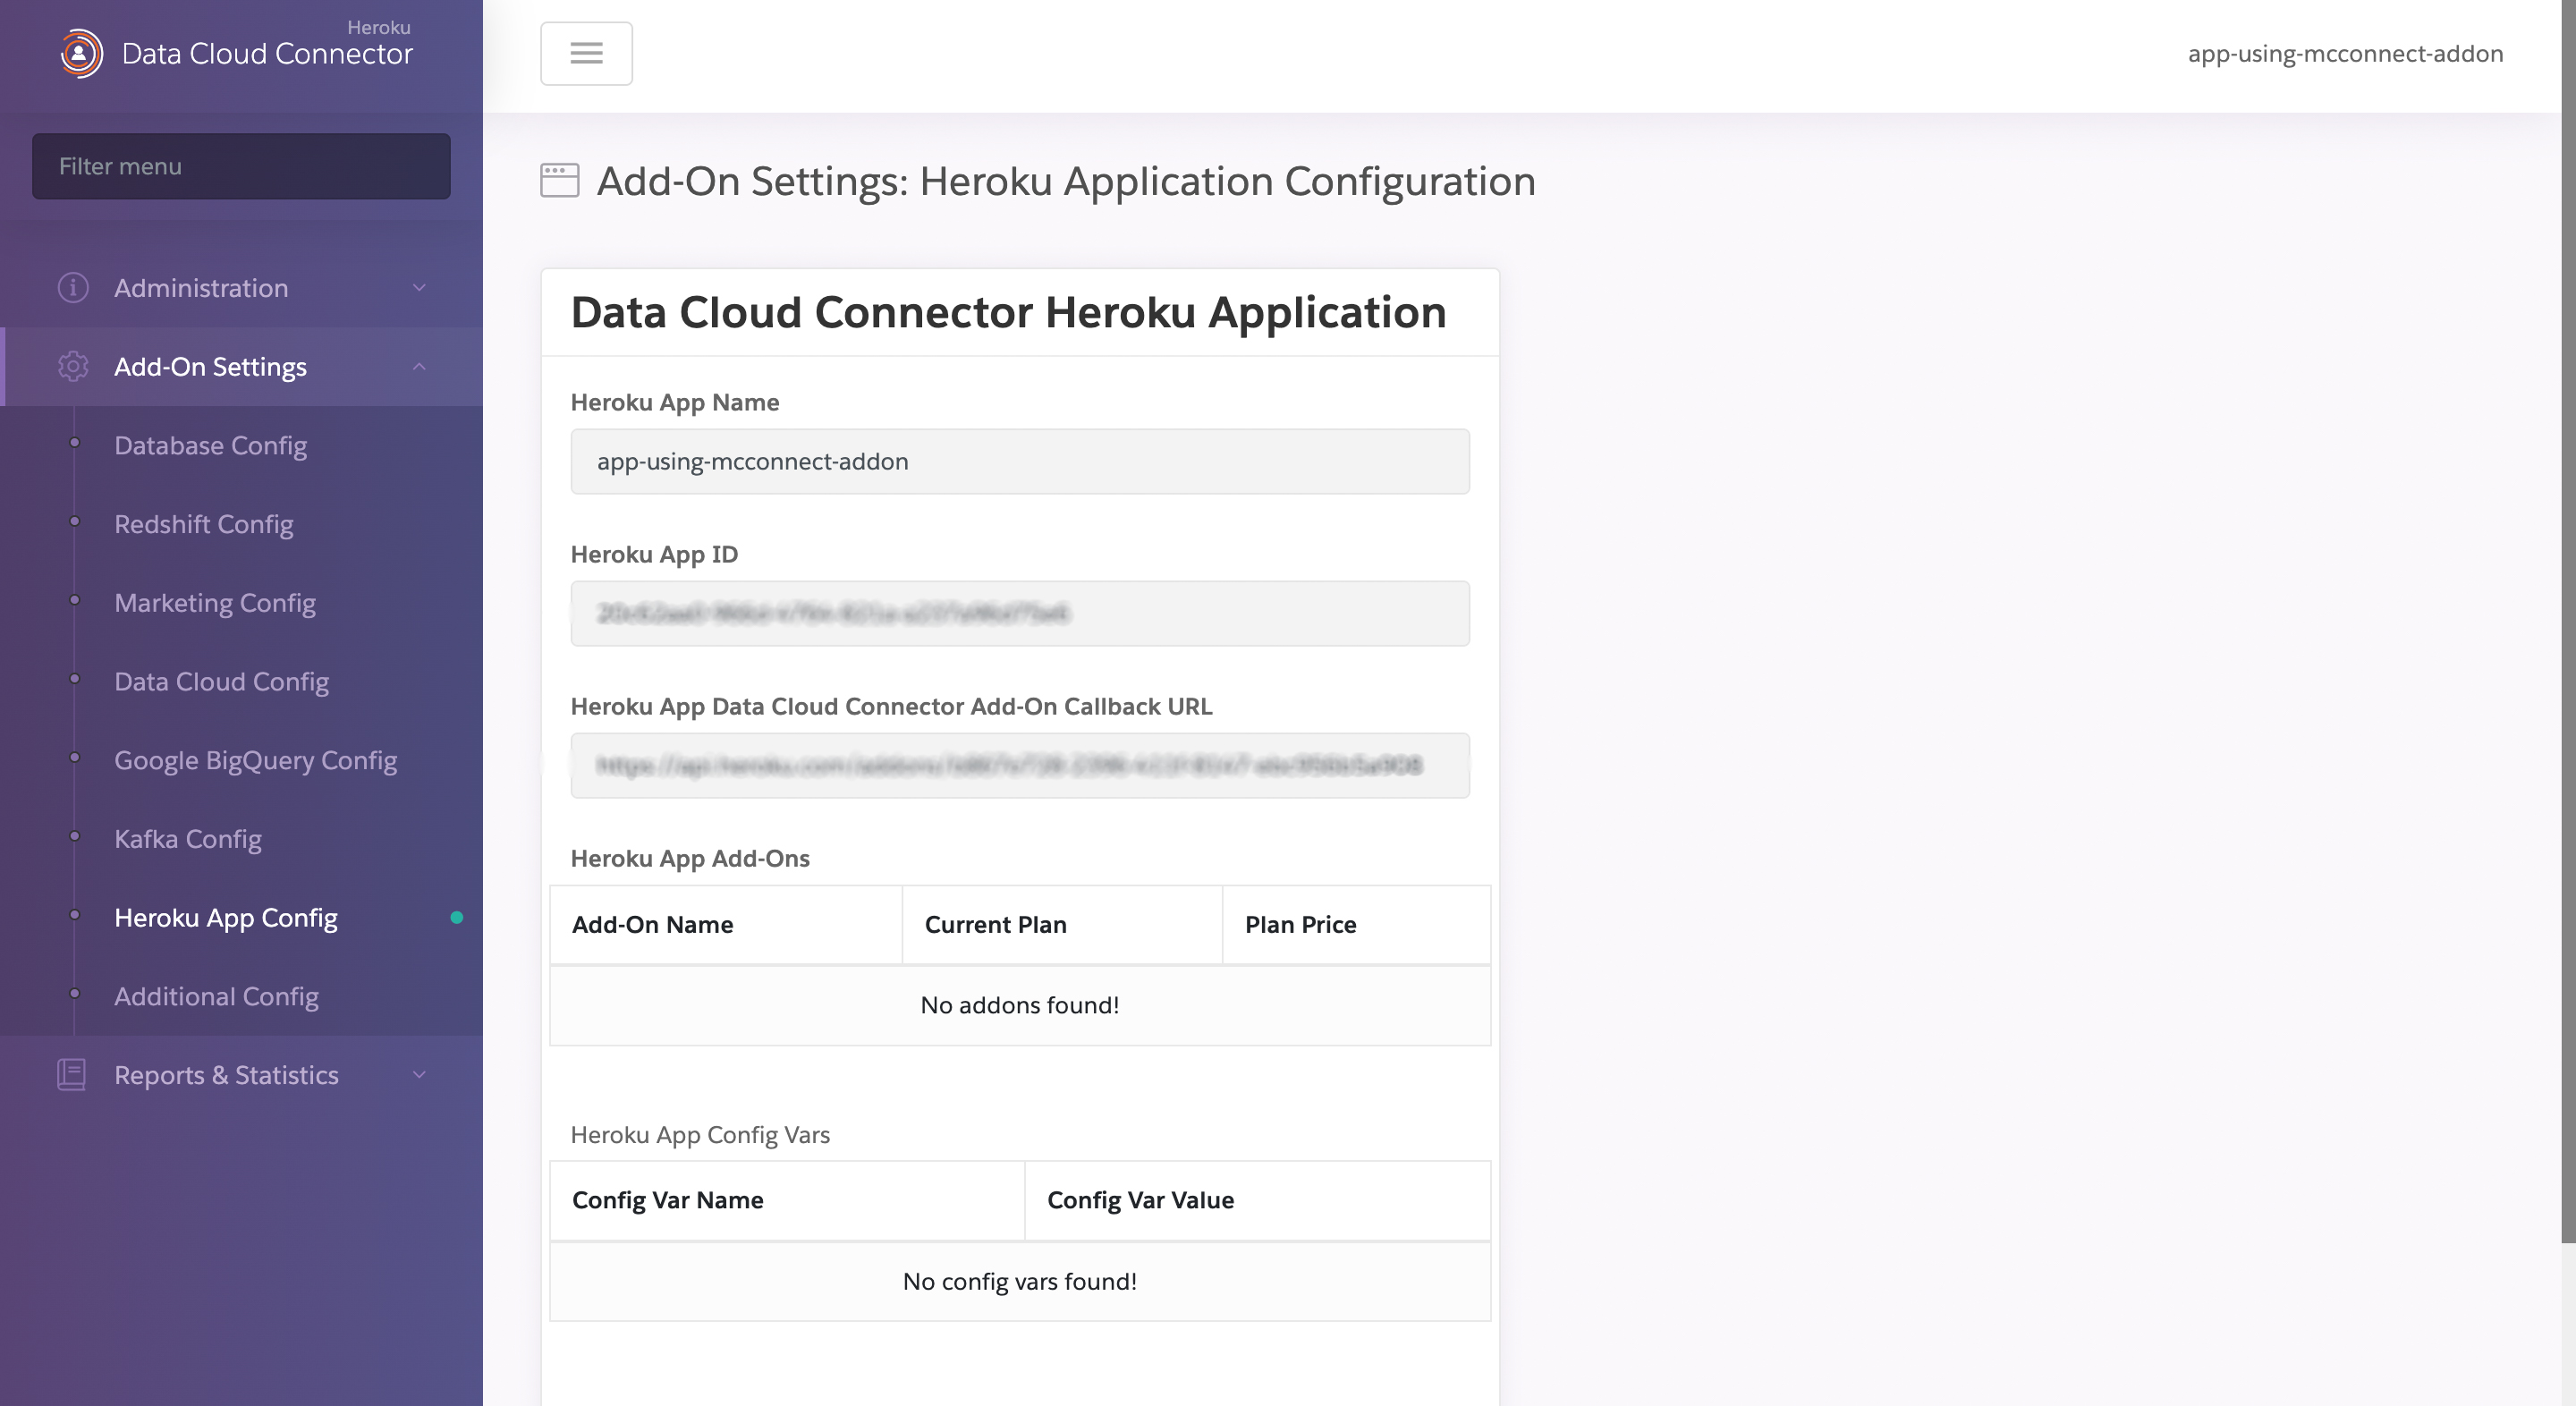 A screenshot of the Heroku Application Configuration page showing the app's name, app ID, and other settings.